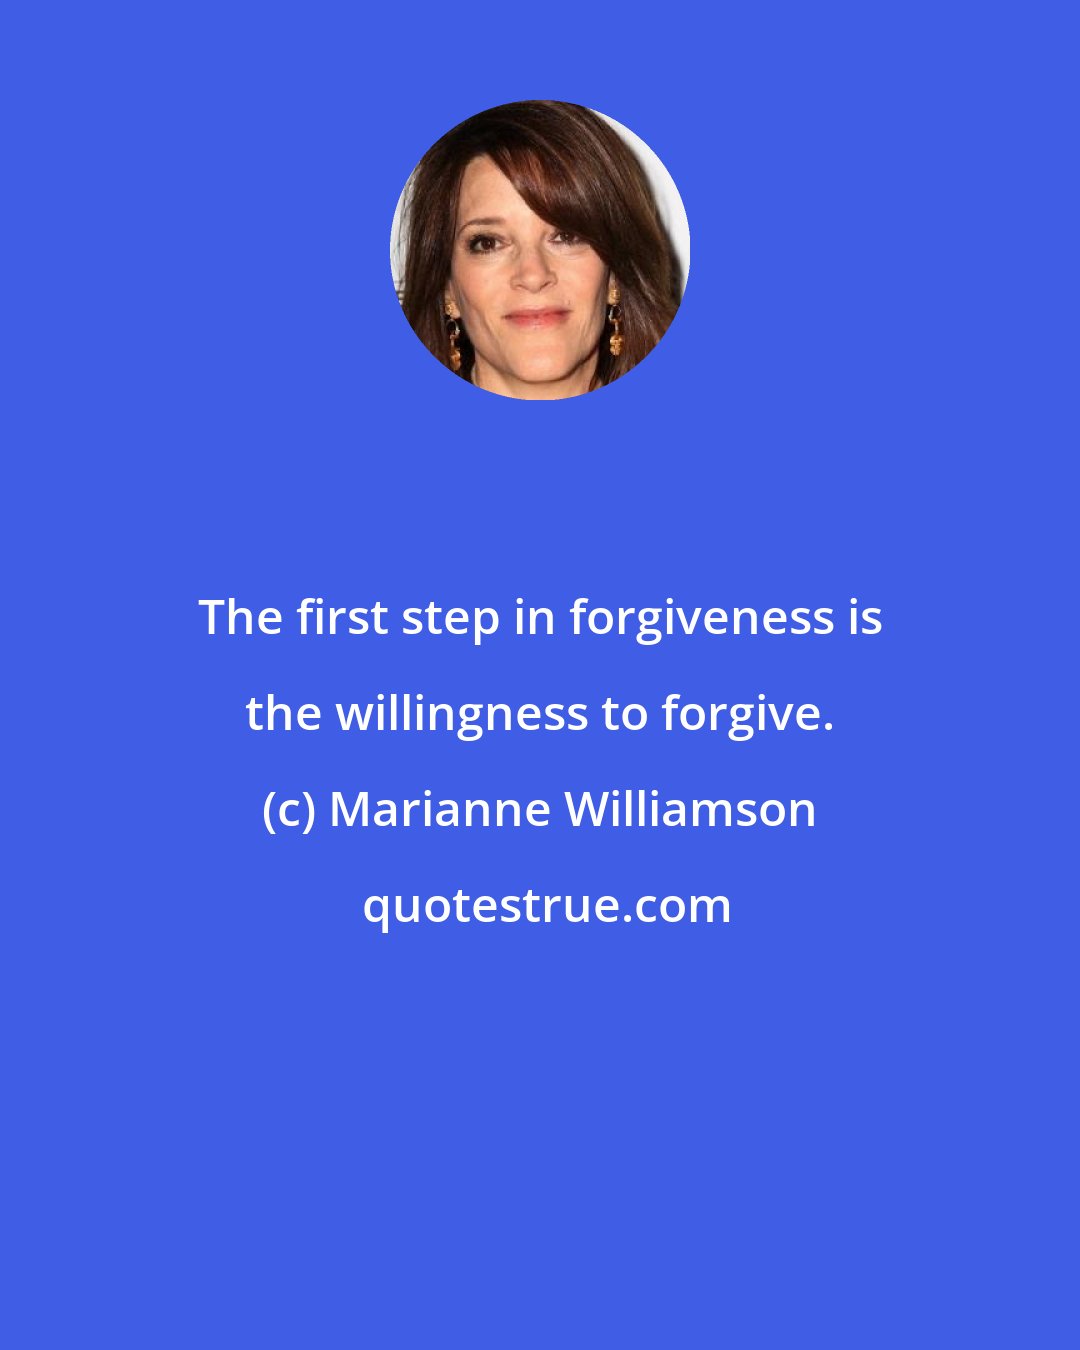 Marianne Williamson: The first step in forgiveness is the willingness to forgive.